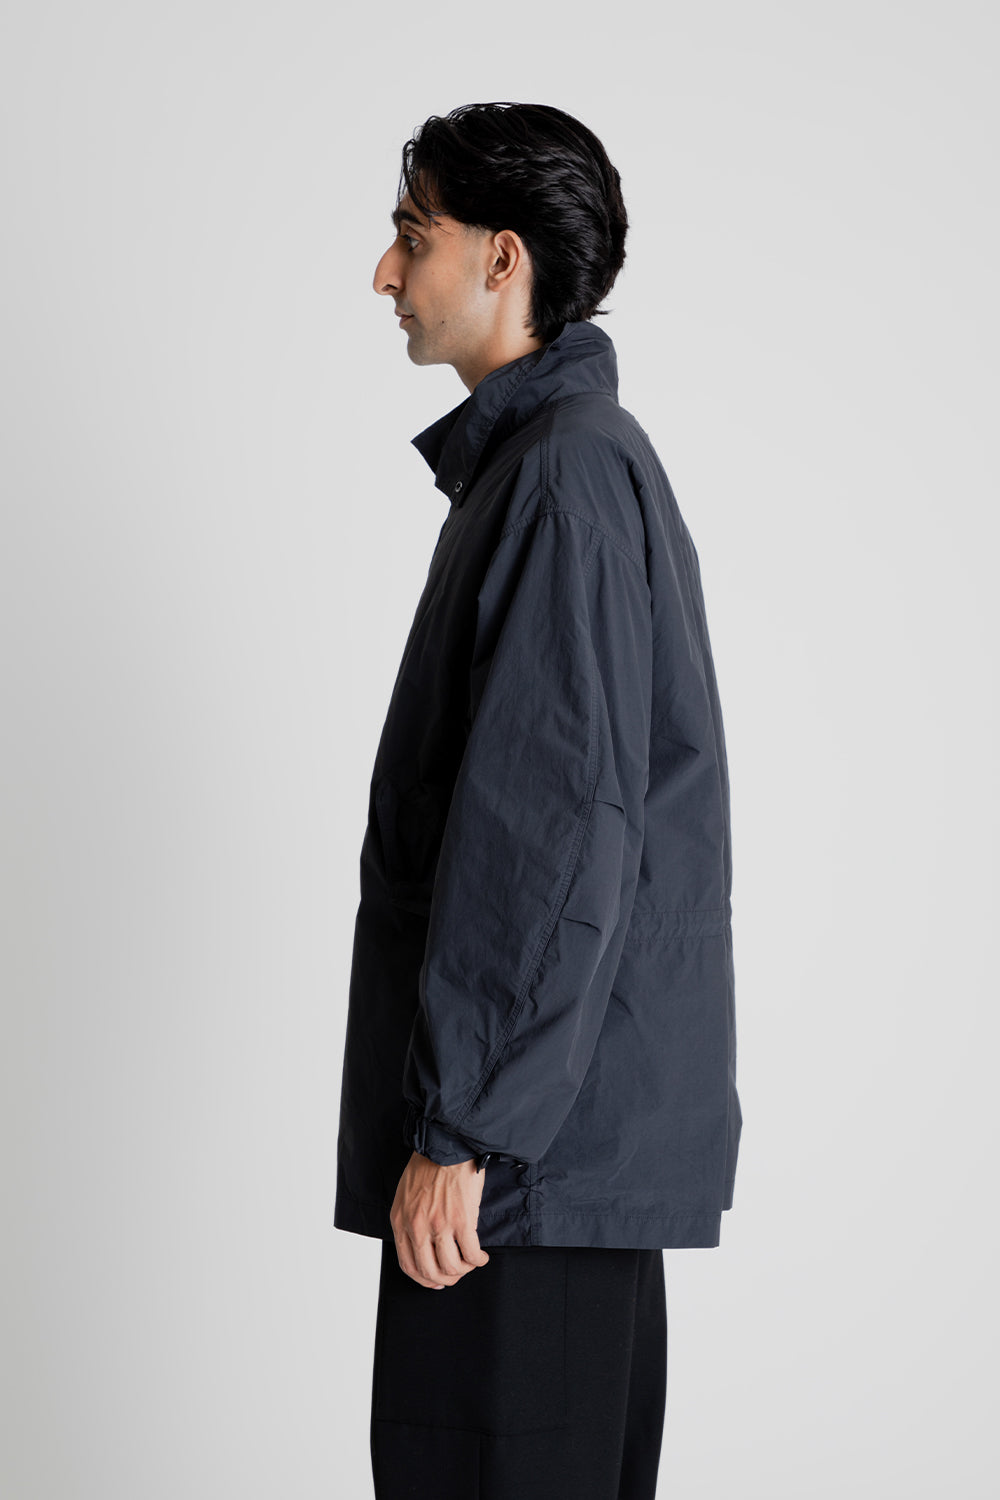 Aton Air Weather Short Mods Coat in Charcoal Grey